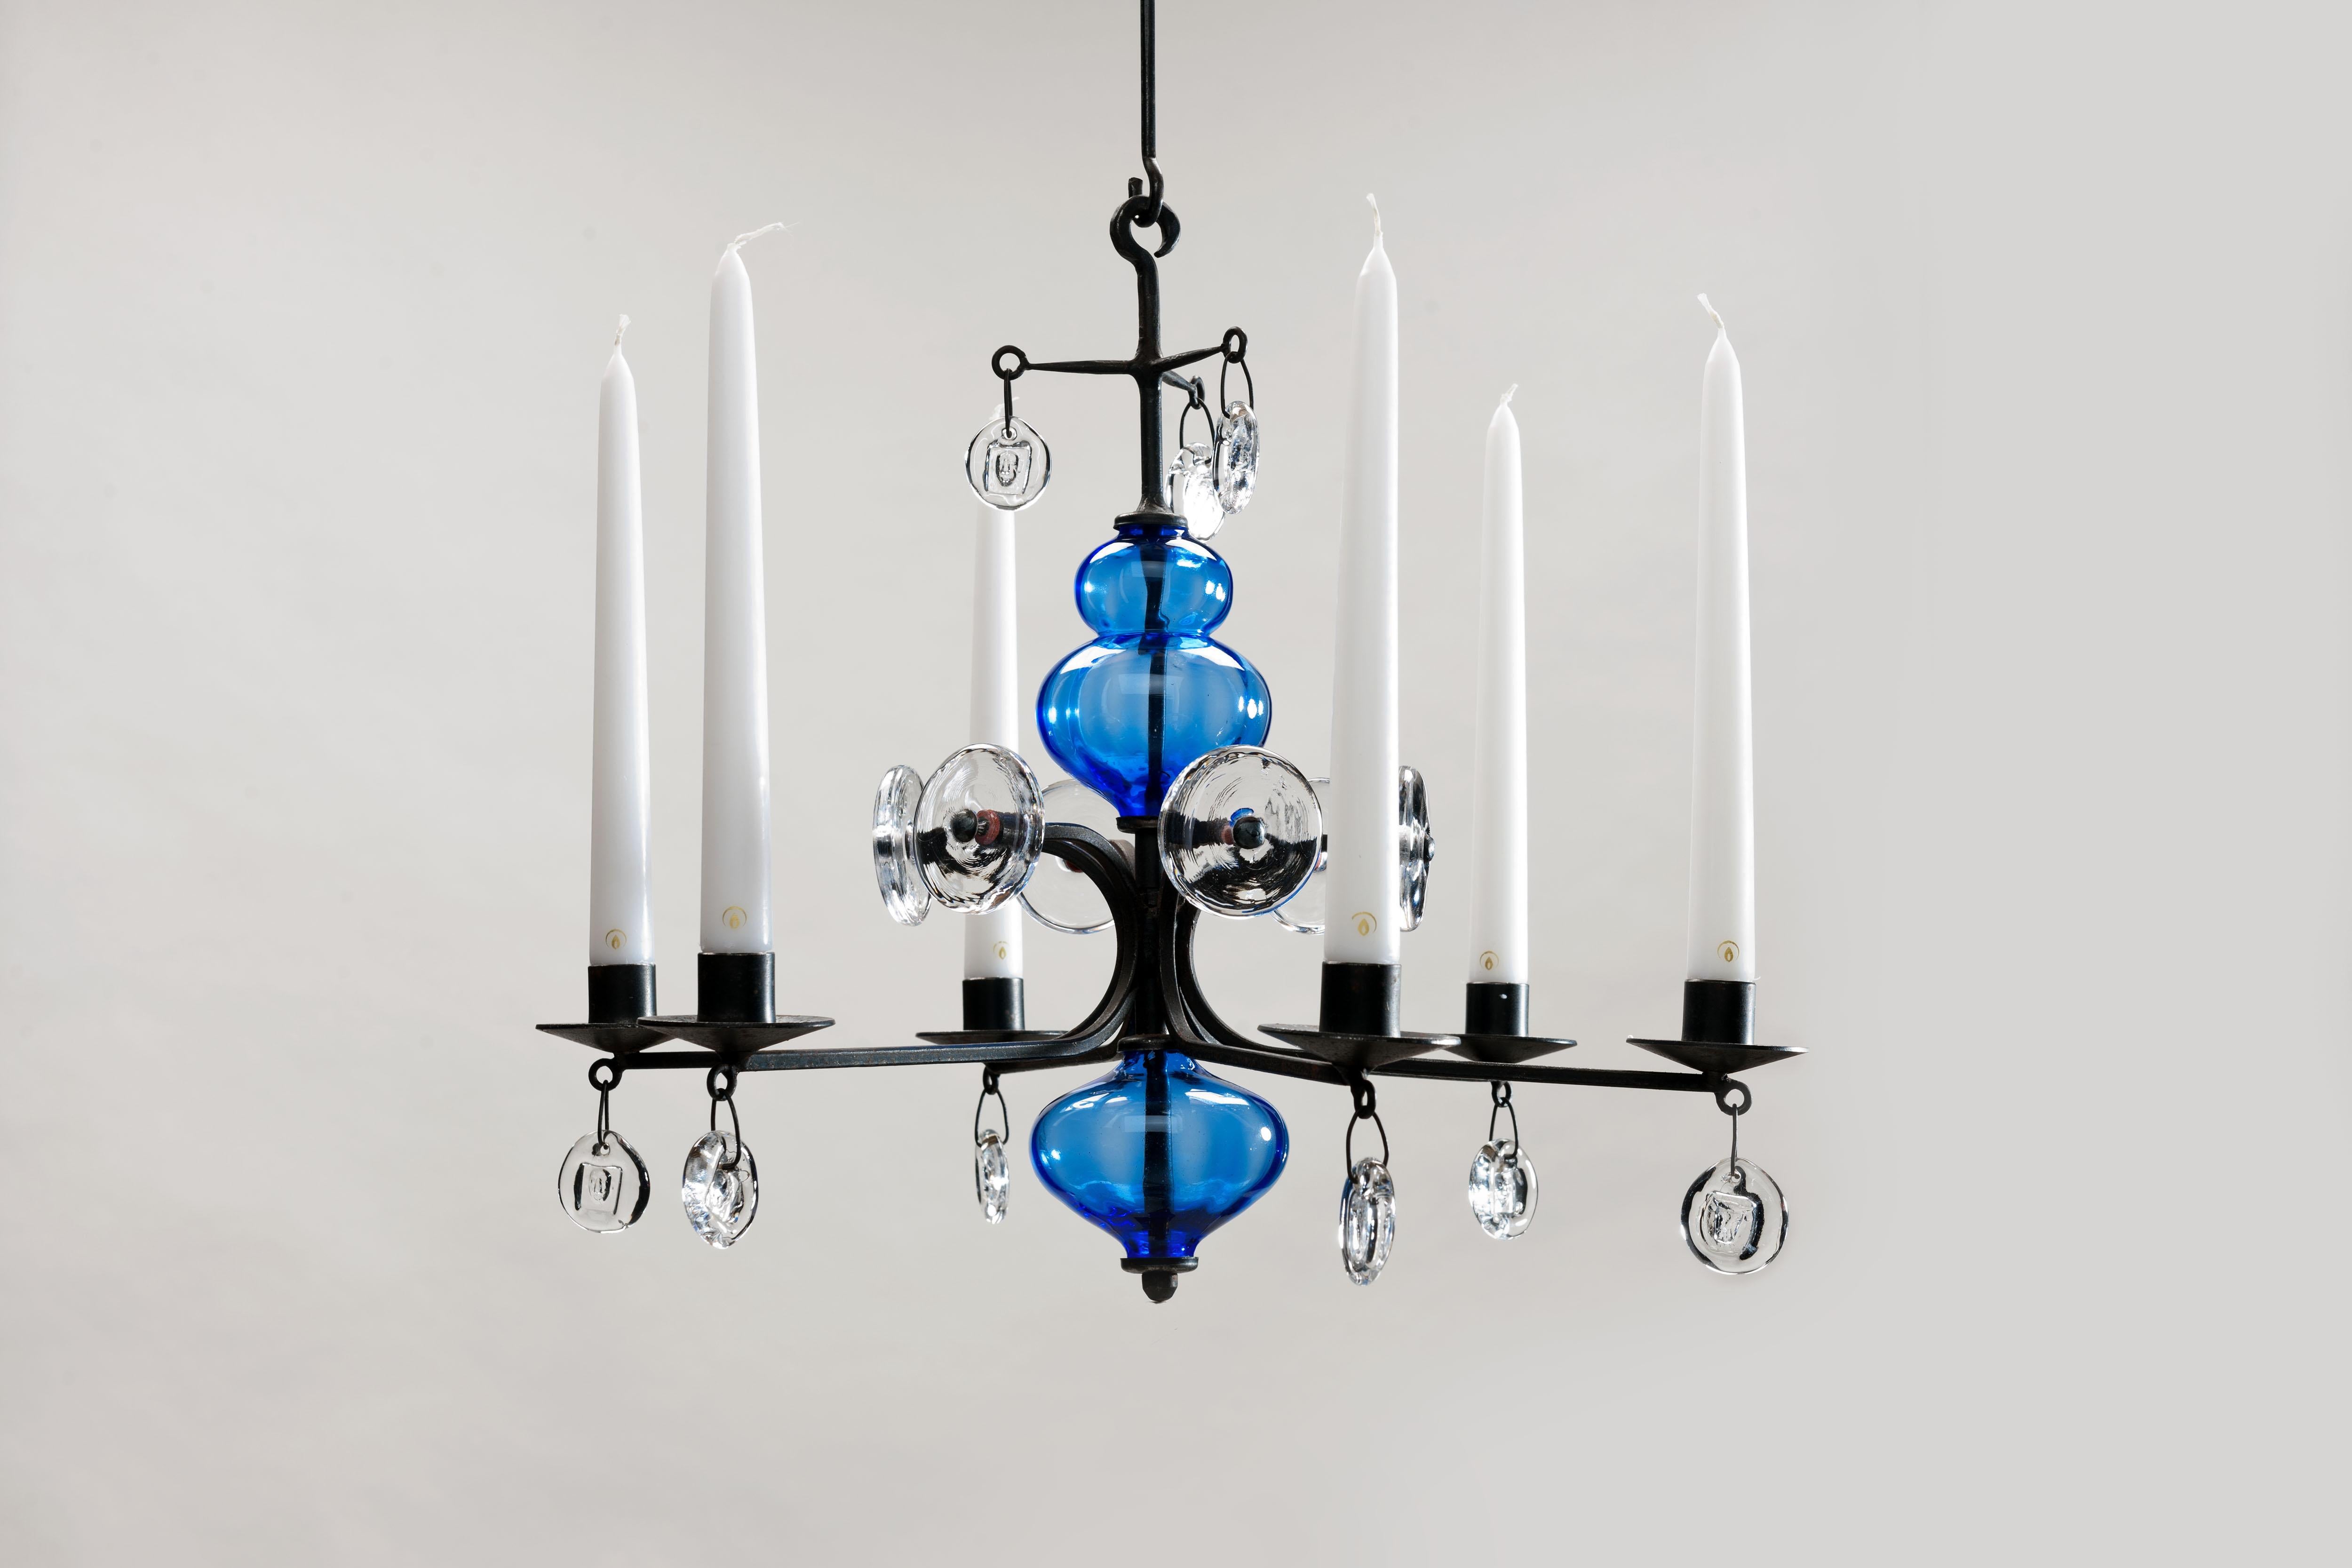 Chandelier for 6 candles by Swedish designer Erik Hoglund executed from blackened iron with blue glass ornaments and various signature handcrafted glass discs with impressed images of various types of faces. 
The chandelier comes with two original